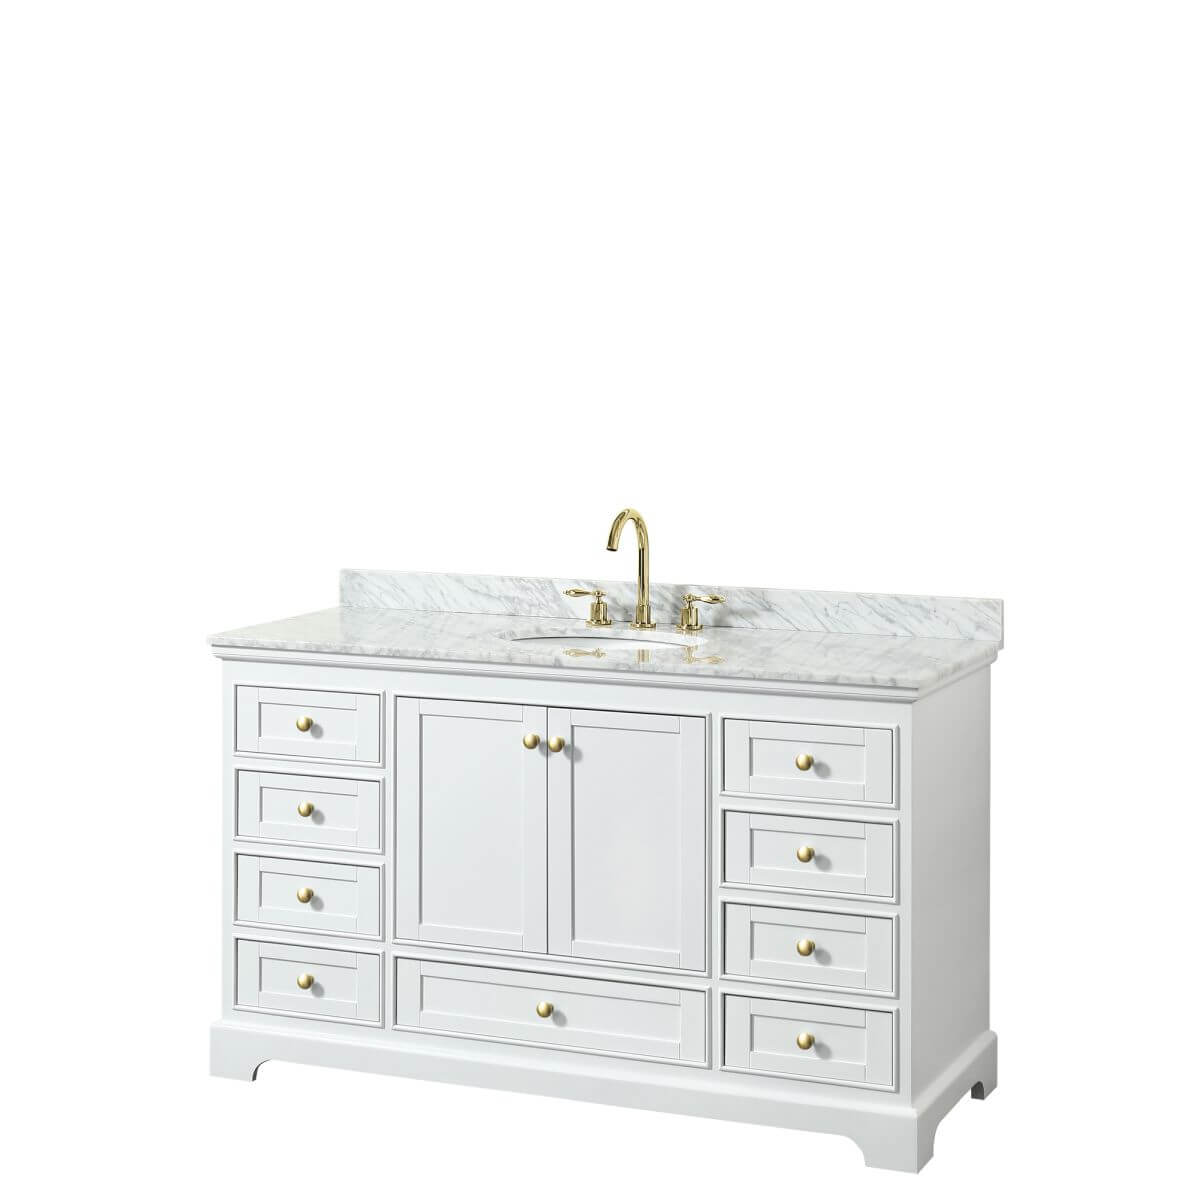 Wyndham Collection Deborah 60 inch Single Bathroom Vanity in White with White Carrara Marble Countertop, Undermount Oval Sink, Brushed Gold Trim and No Mirror - WCS202060SWGCMUNOMXX